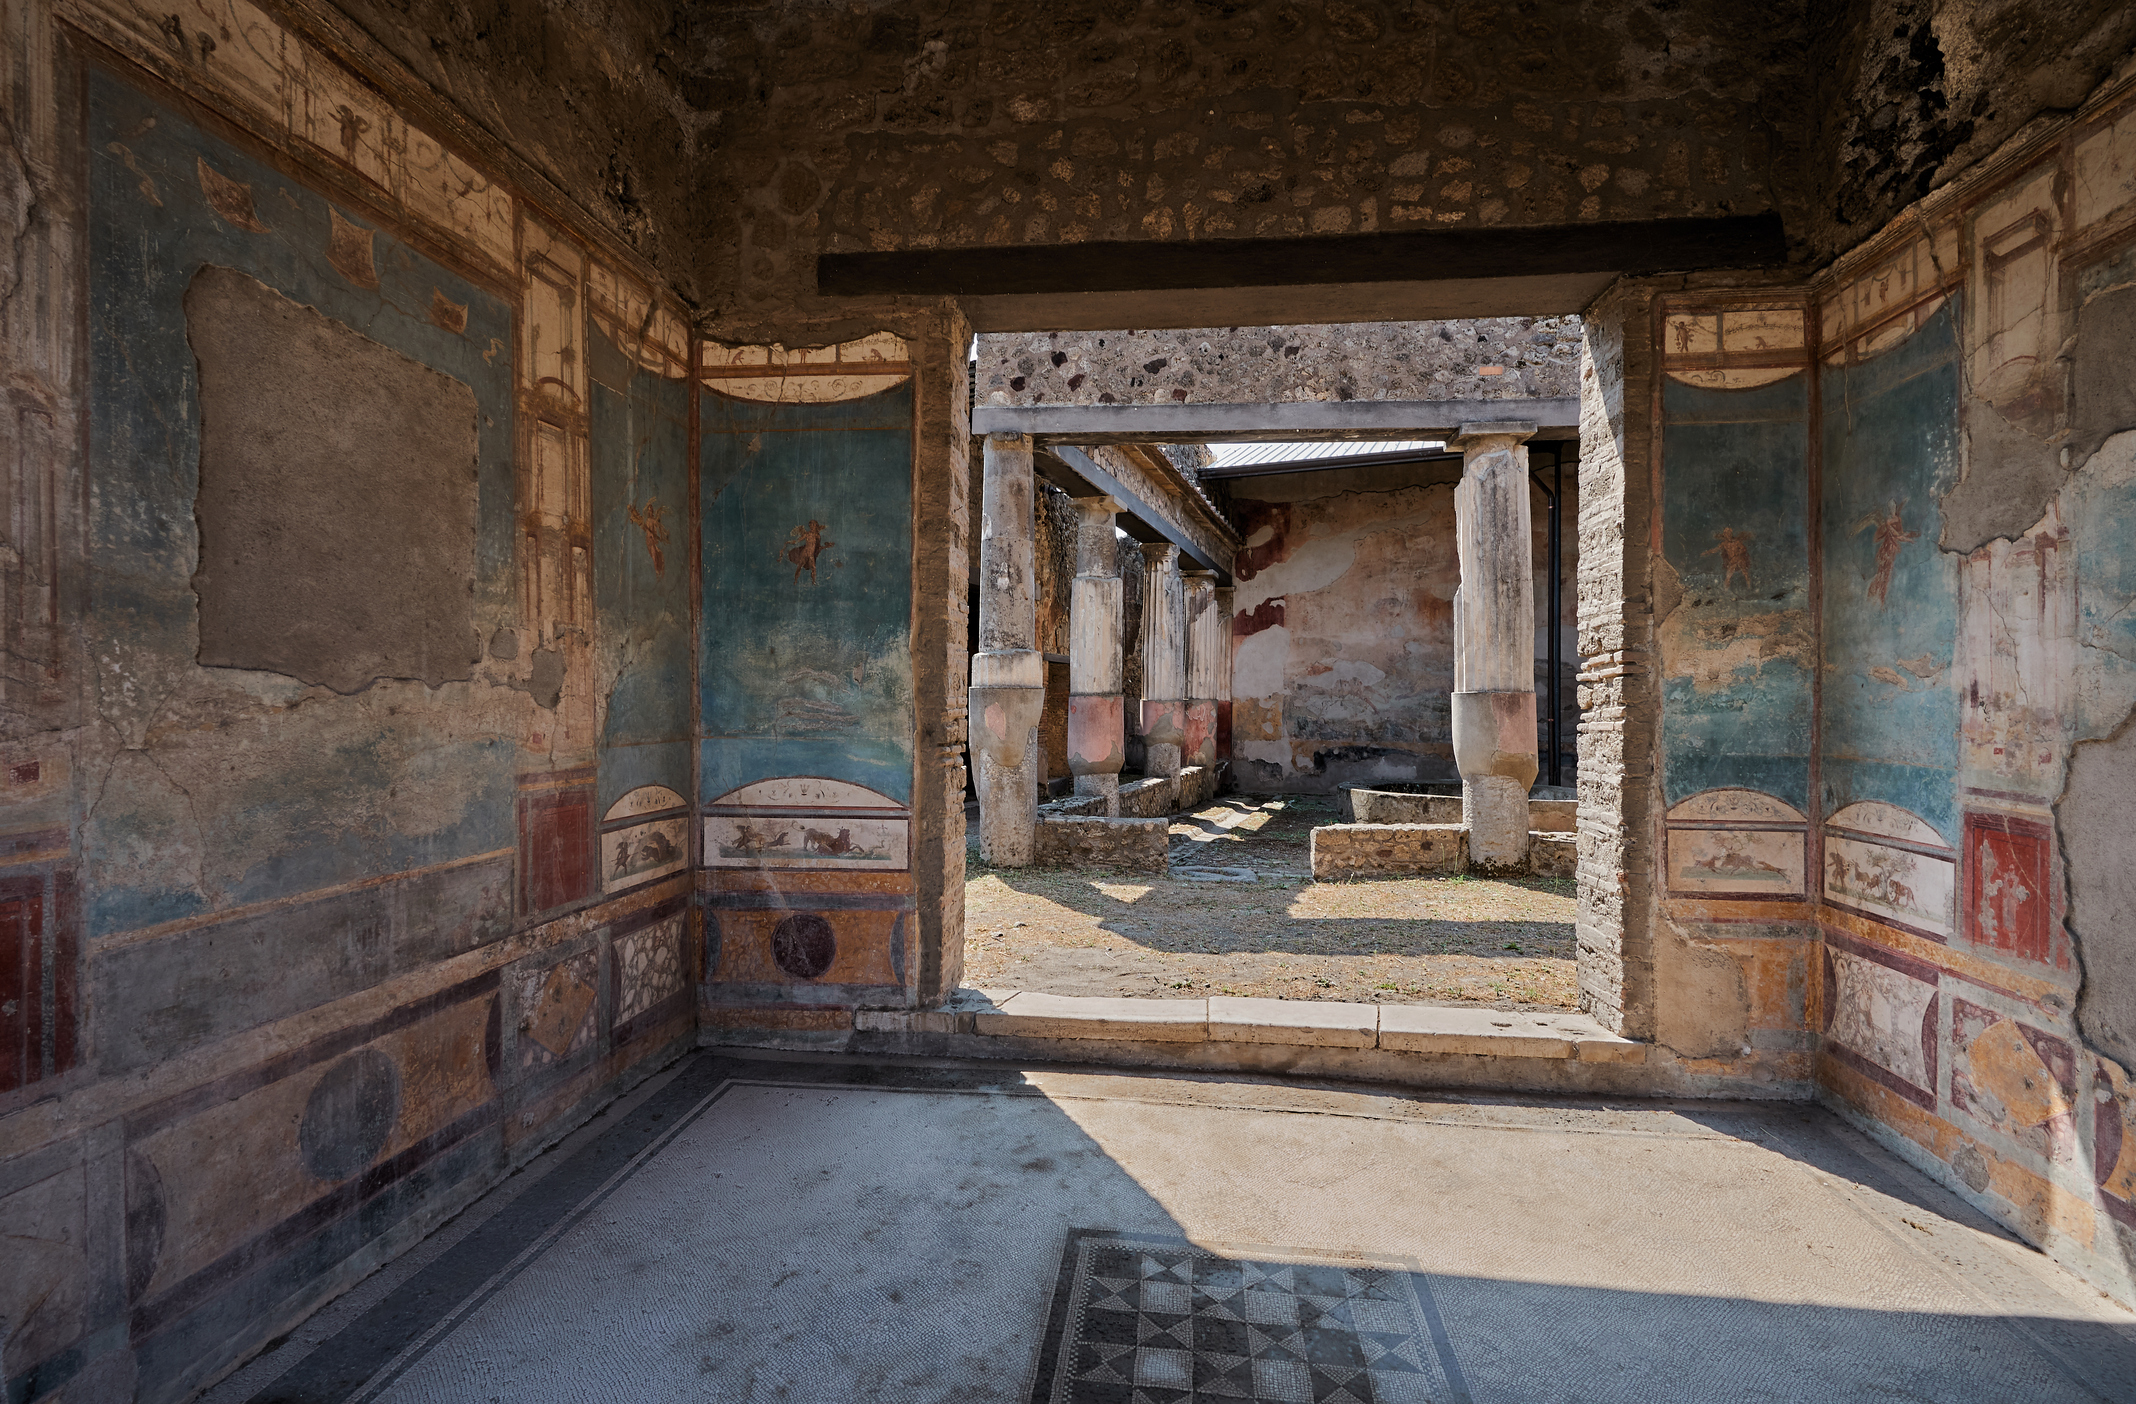 Discoveries At Pompeii Give New Details About Life In City Before Famed Volcanic Eruption